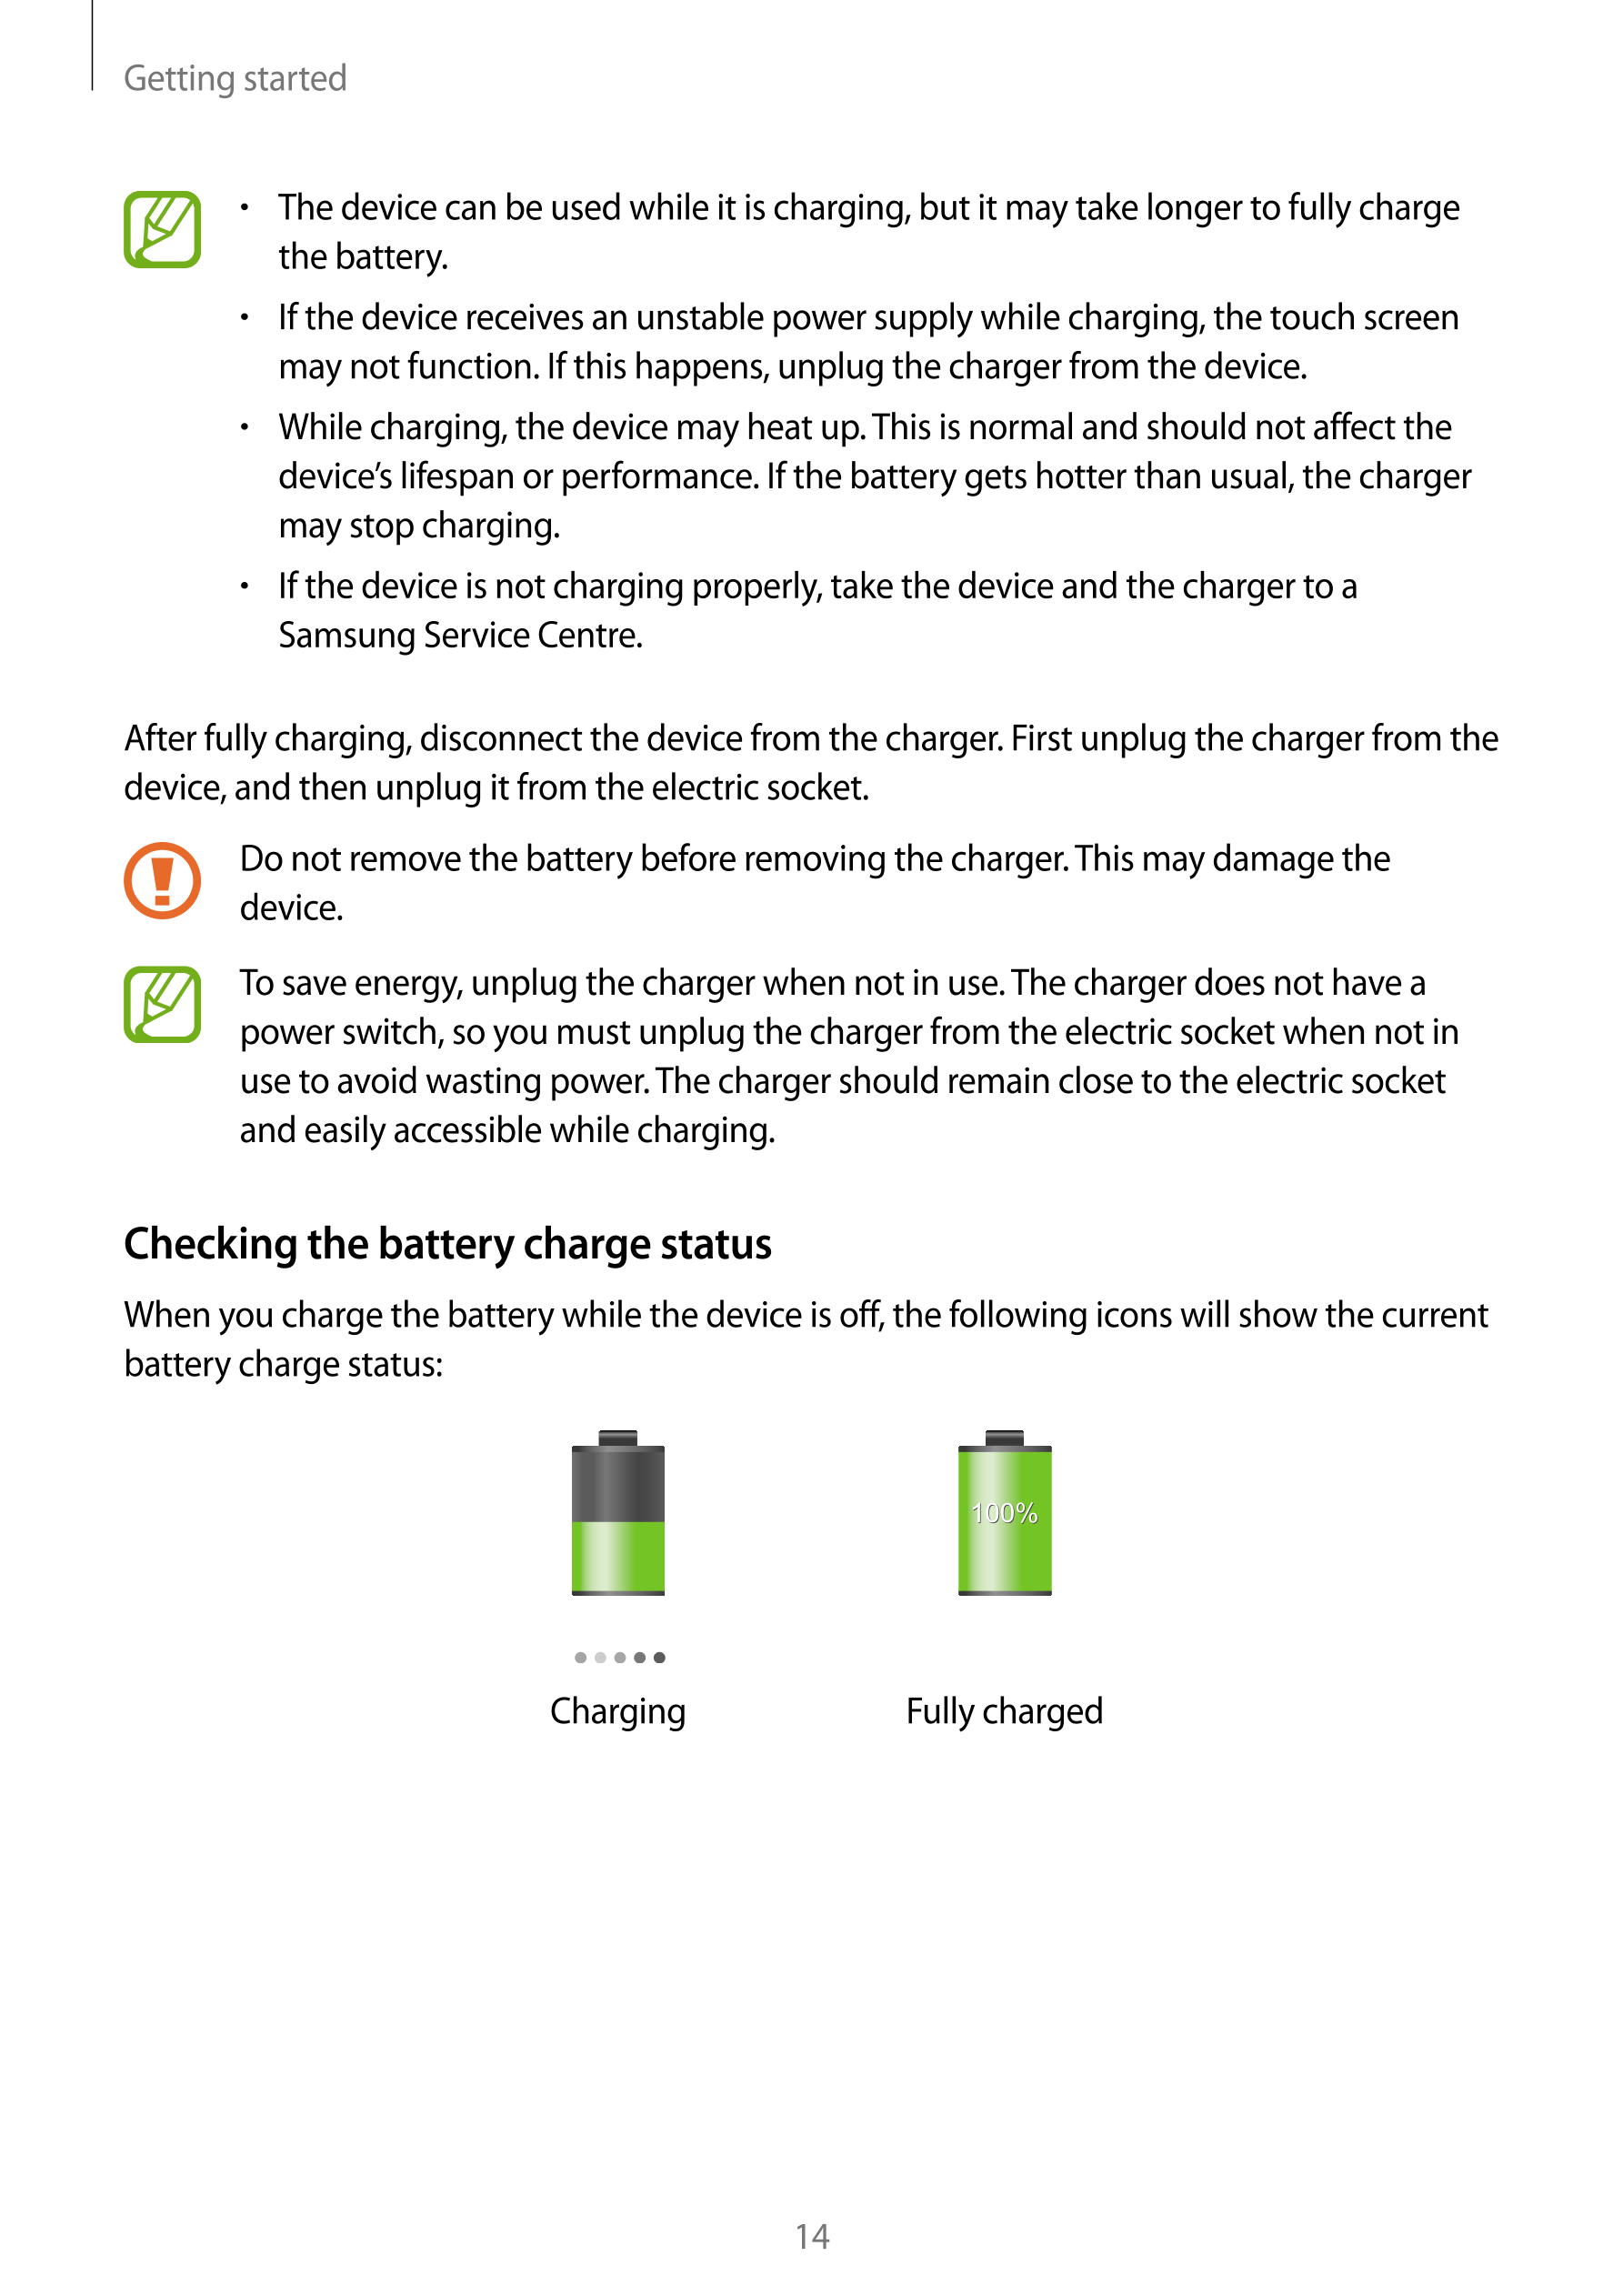 Getting started
•    The device can be used while it is charging, but it may take longer to fully charge 
the battery.
•    If t